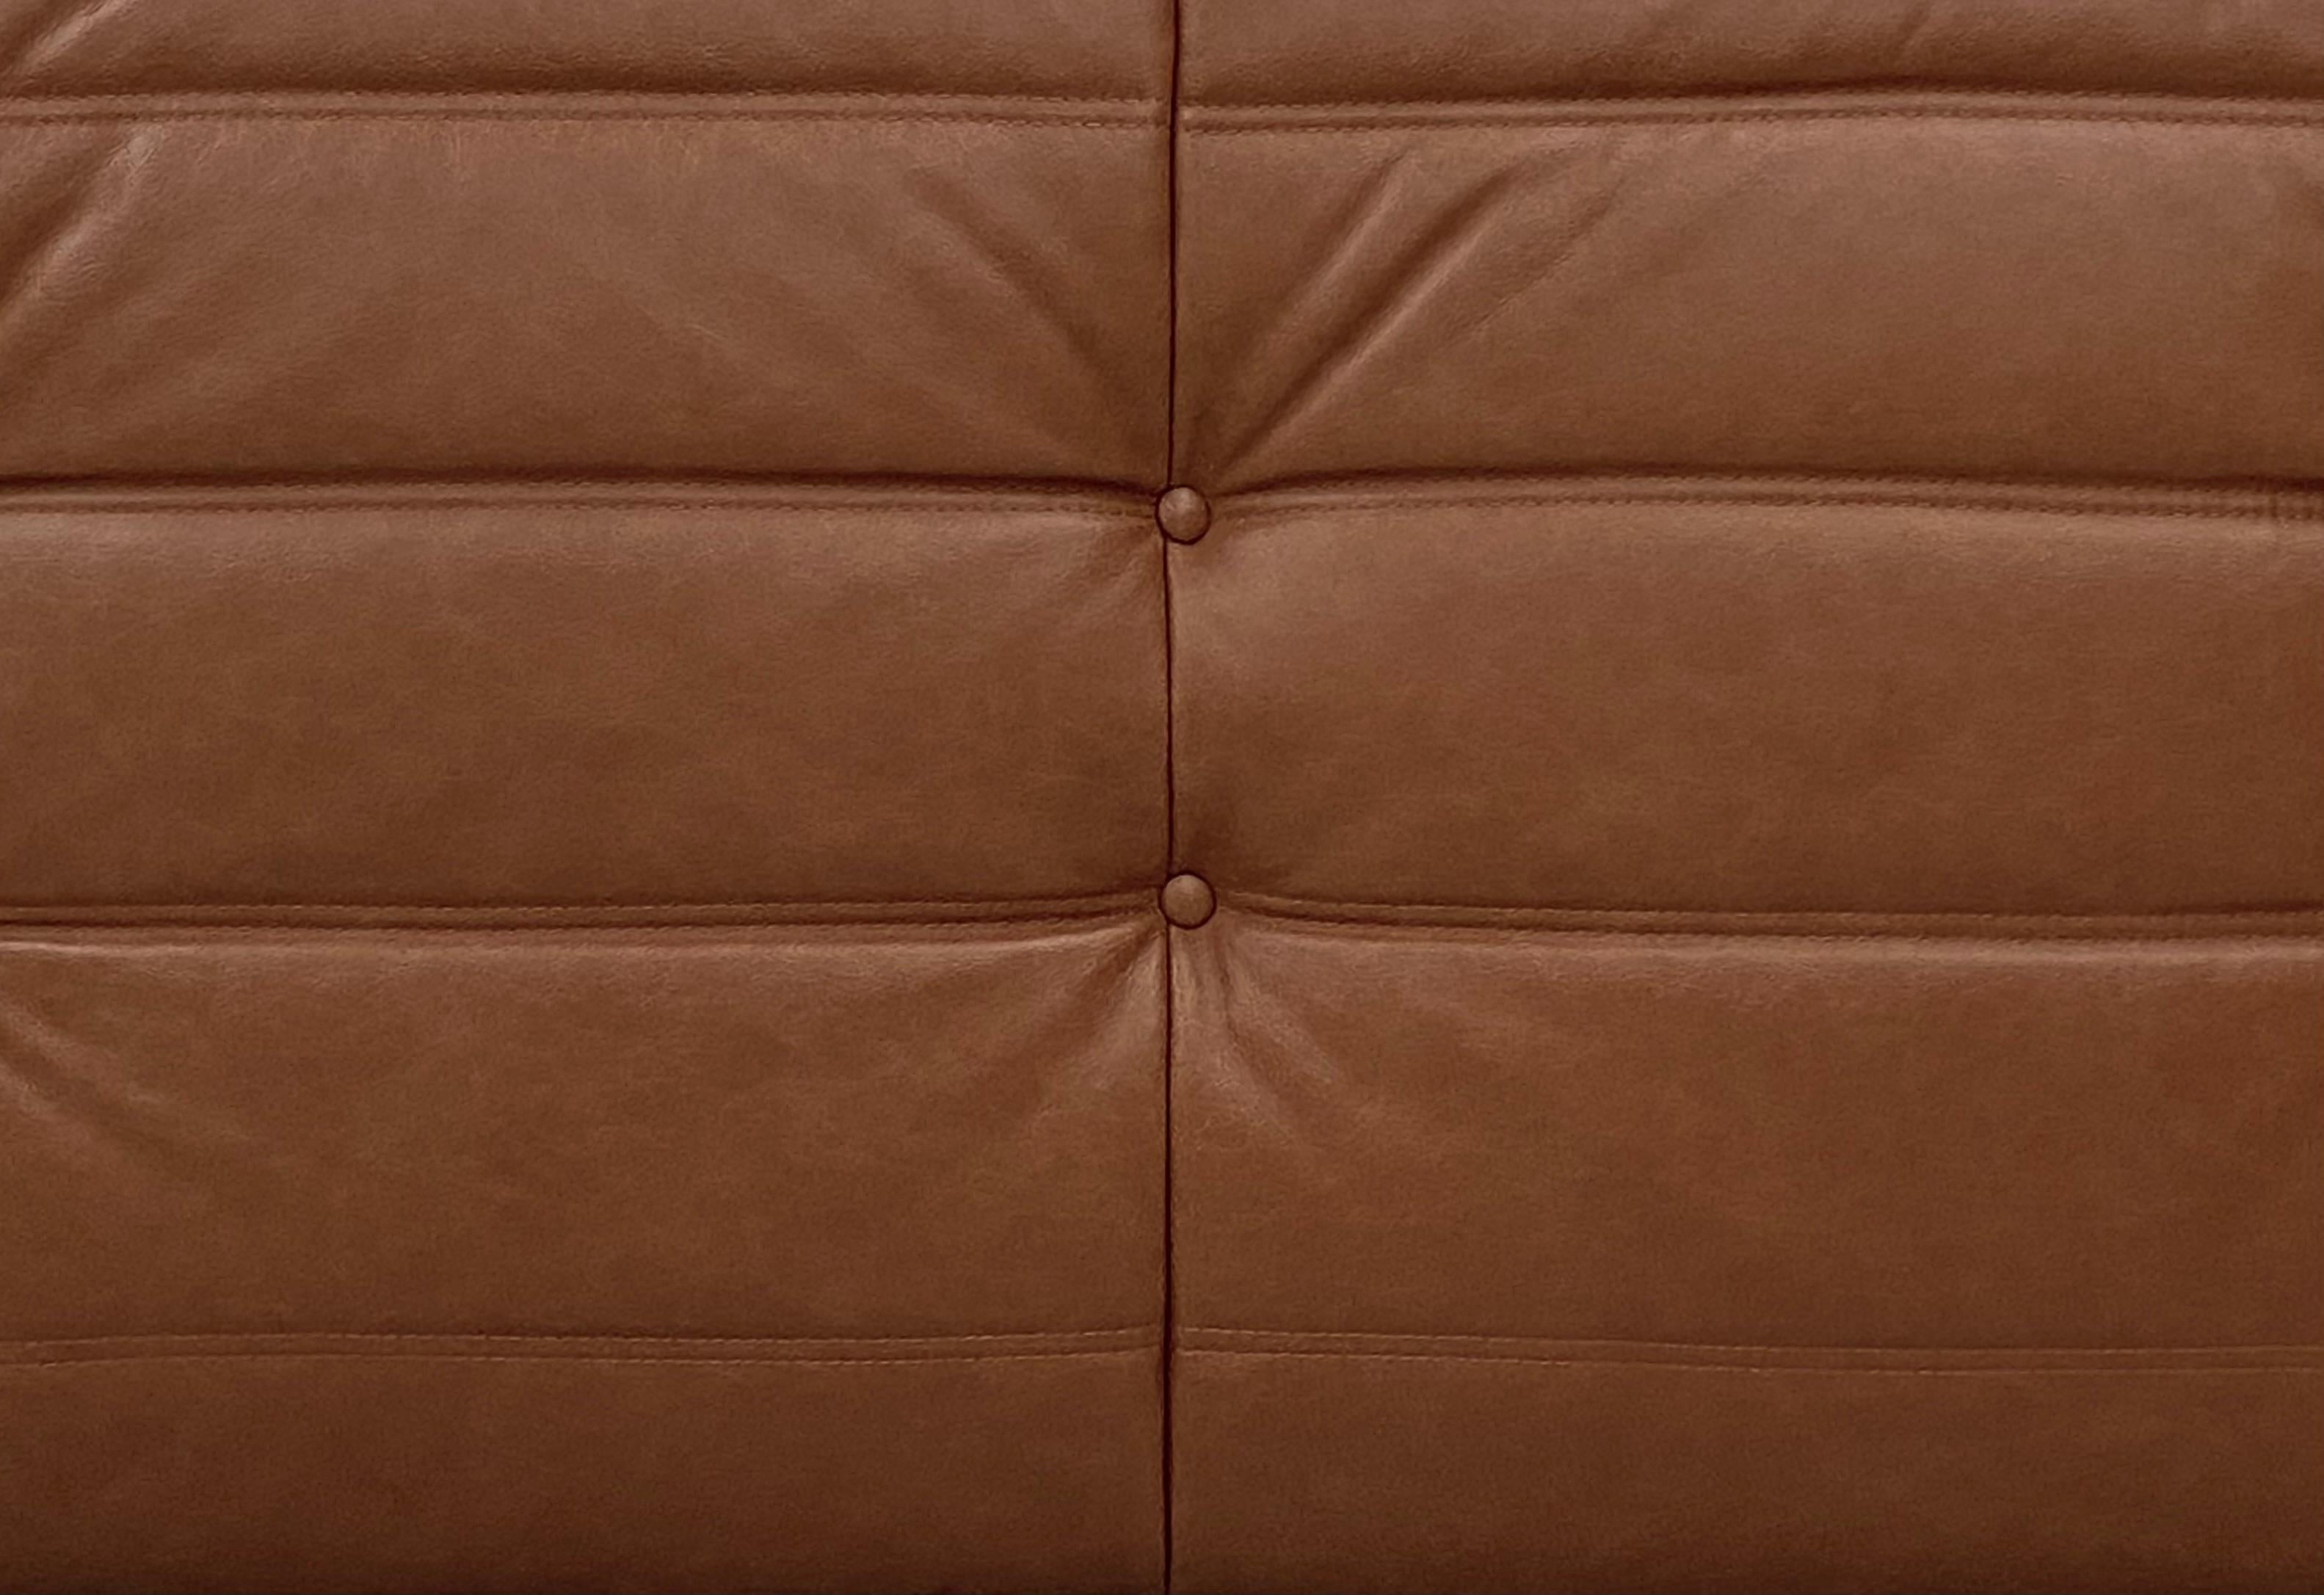 20th Century French Vintage Togo Sofa in Mid Brown Leather by Michel Ducaroy for Ligne Roset. For Sale